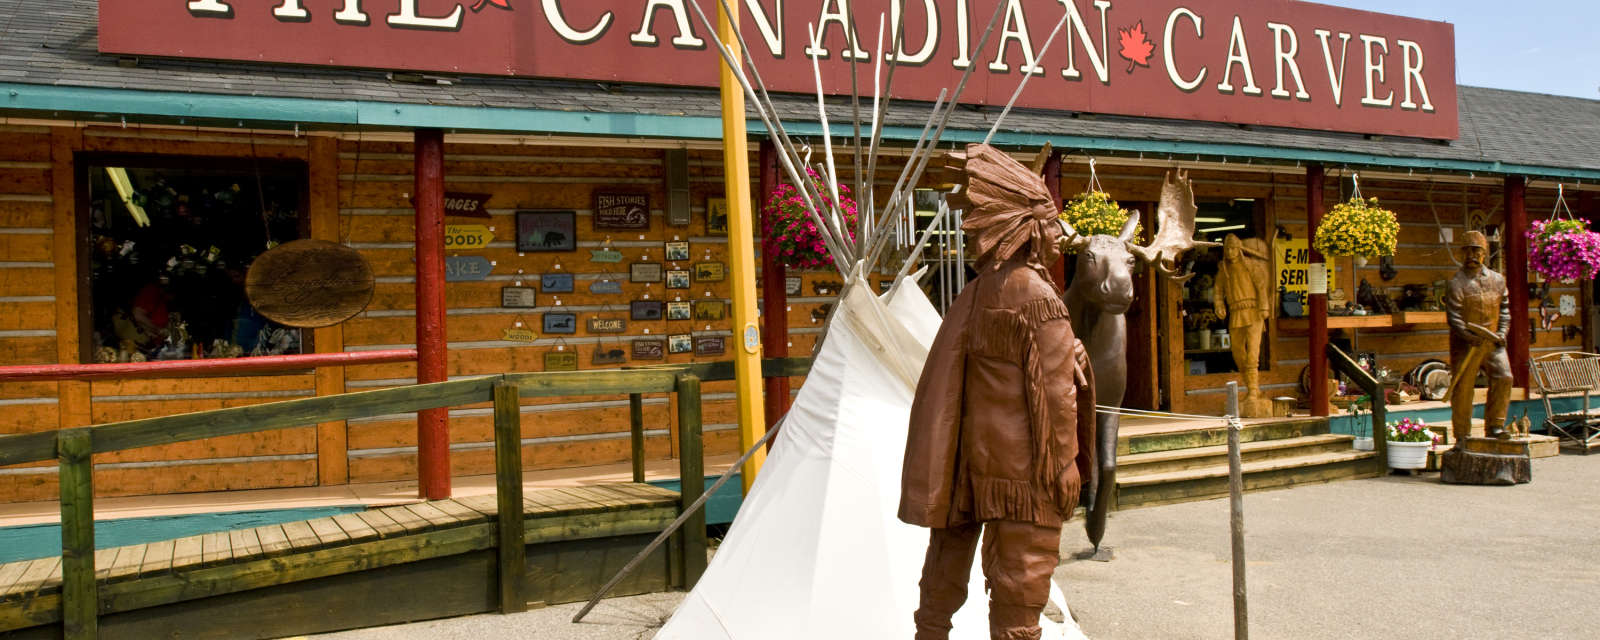 Agawa Crafts and The Canadian Carver